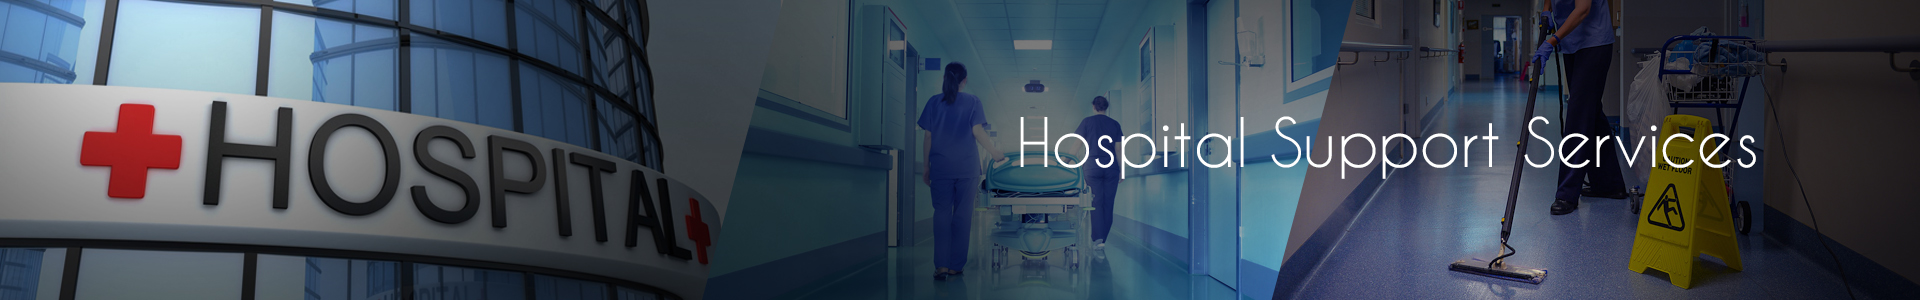 Hospital Support Services